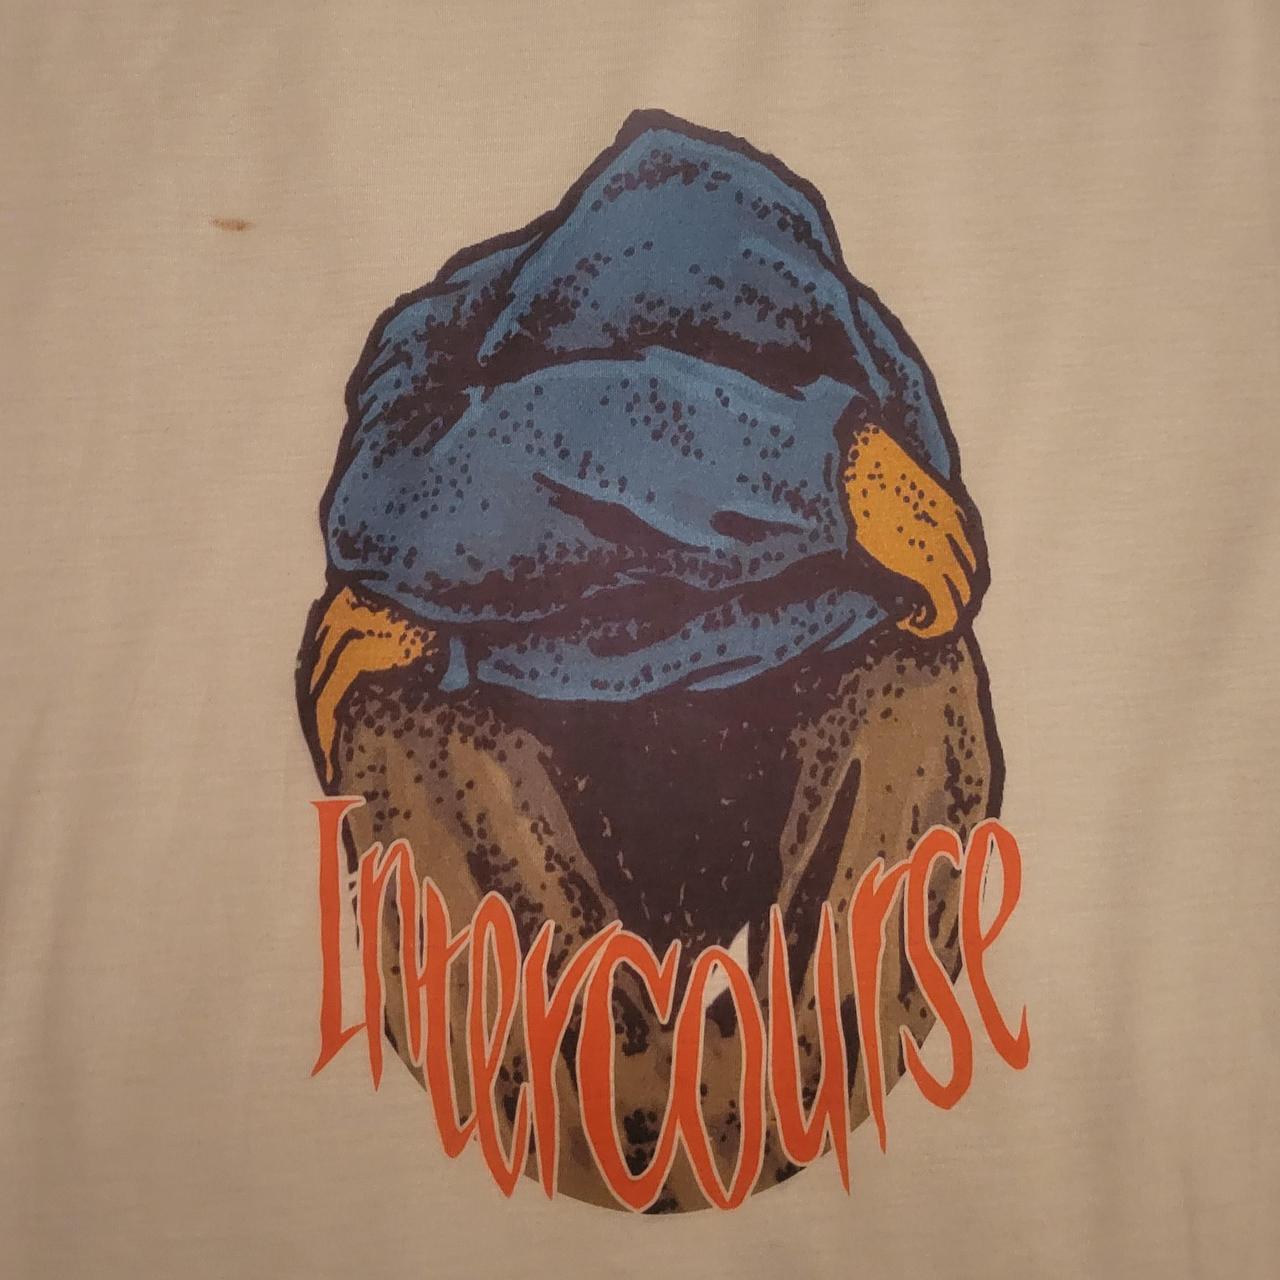 Product Image 1 - Intercourse shirt LARGE worn once